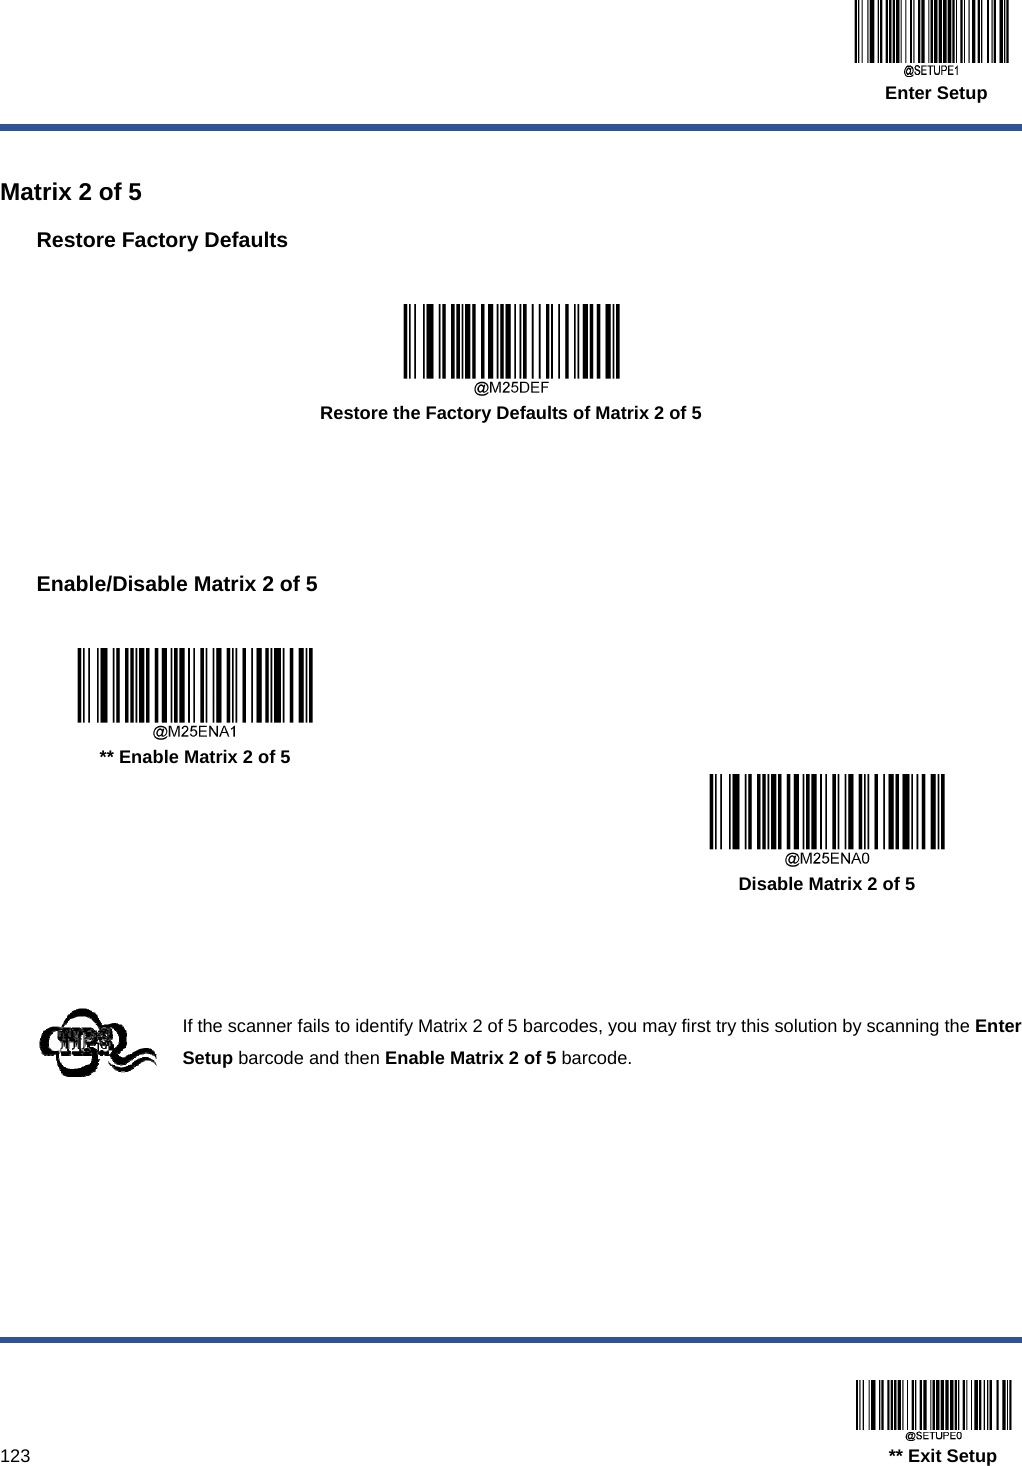  Enter Setup  123                                                                                   ** Exit Setup  Matrix 2 of 5 Restore Factory Defaults   Restore the Factory Defaults of Matrix 2 of 5     Enable/Disable Matrix 2 of 5     ** Enable Matrix 2 of 5      Disable Matrix 2 of 5    If the scanner fails to identify Matrix 2 of 5 barcodes, you may first try this solution by scanning the Enter Setup barcode and then Enable Matrix 2 of 5 barcode.  